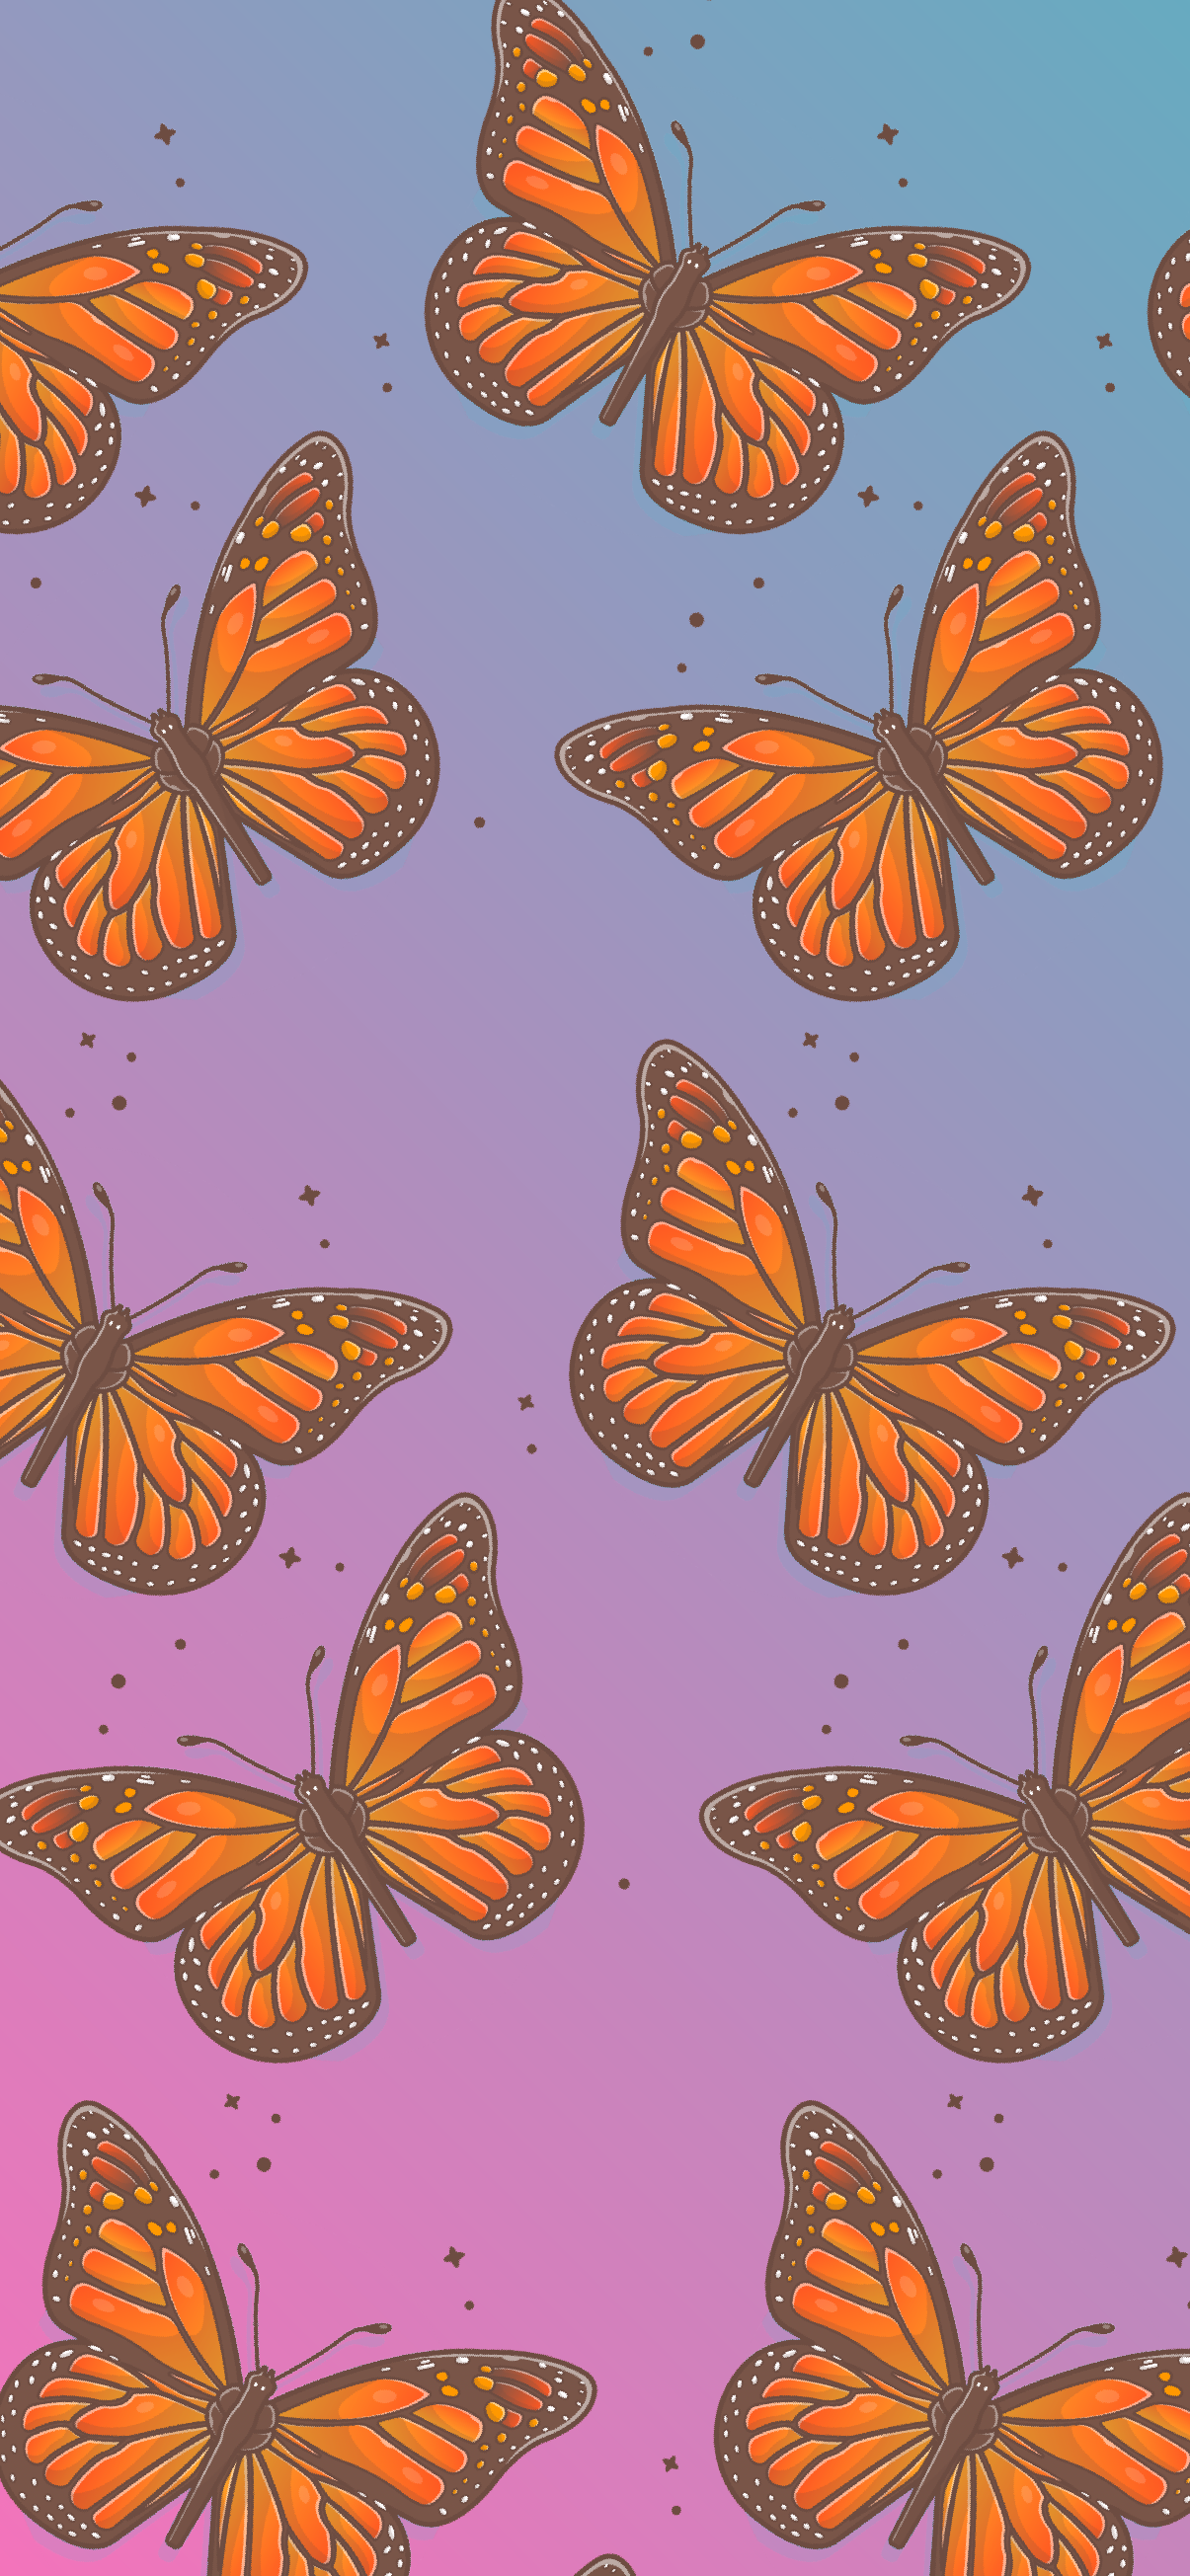 Butterfly pattern wallpapers aesthetic | WallpaperiZe - Phone Wallpapers